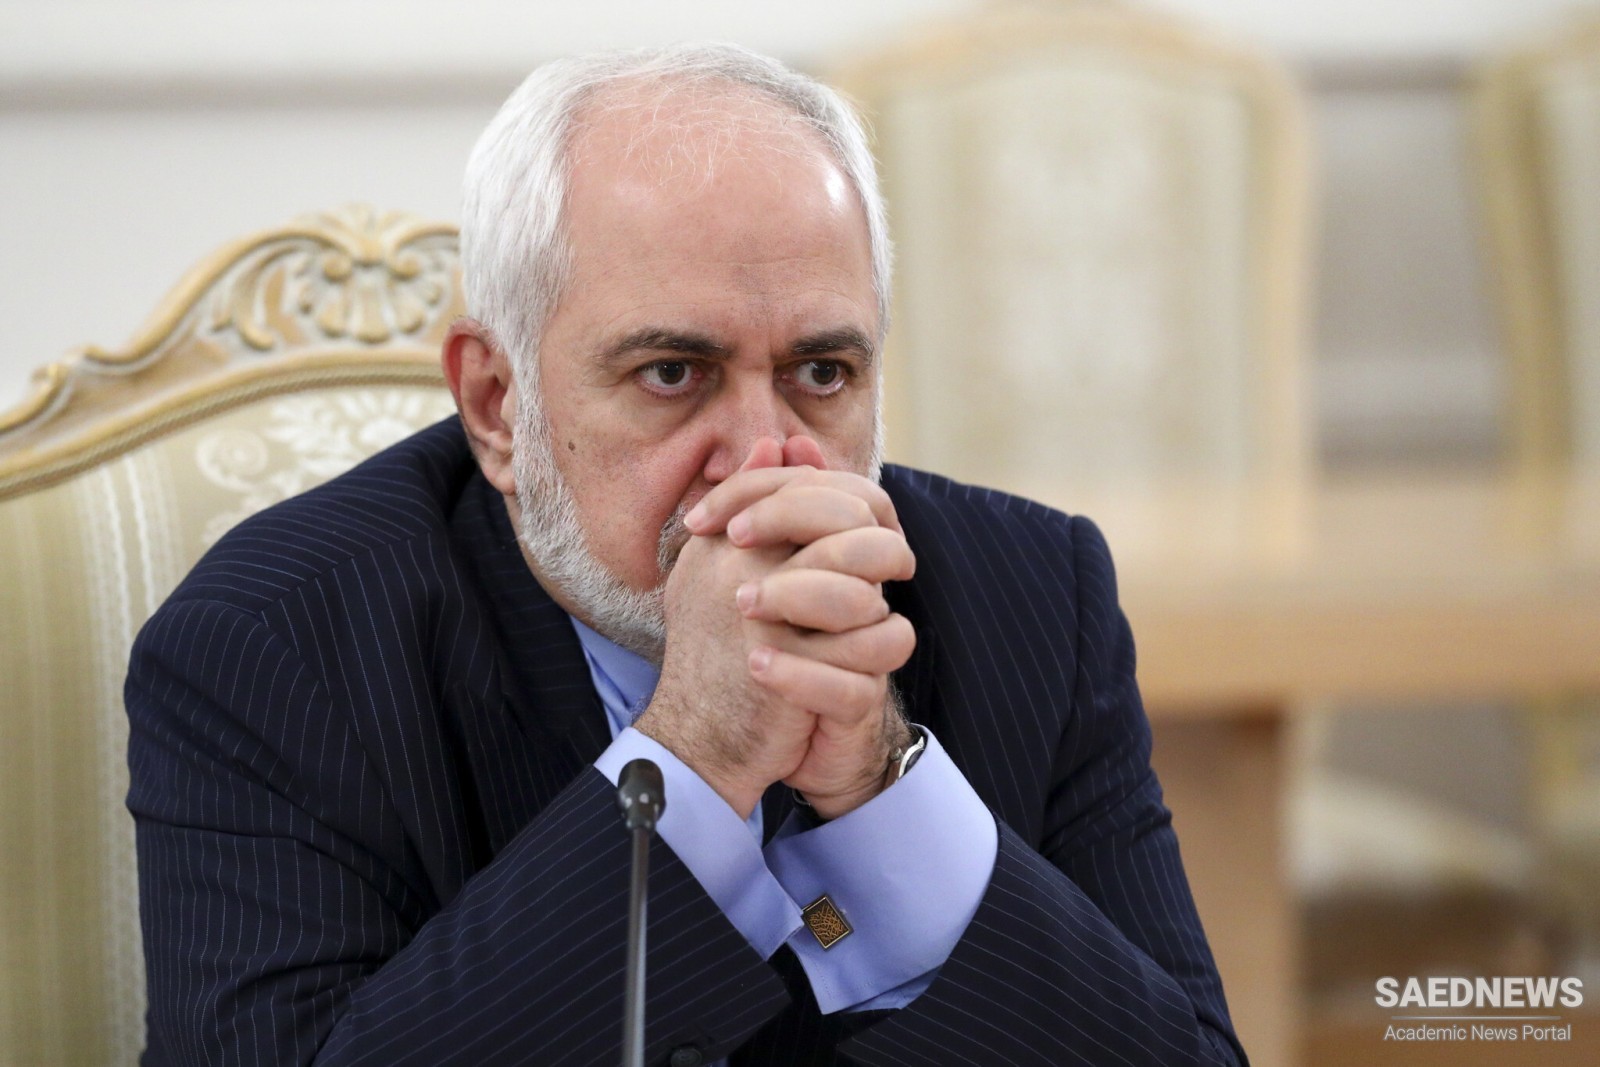 Zarif Reminds E3 of Their Missed Duties Dodged upon Baseless Claims